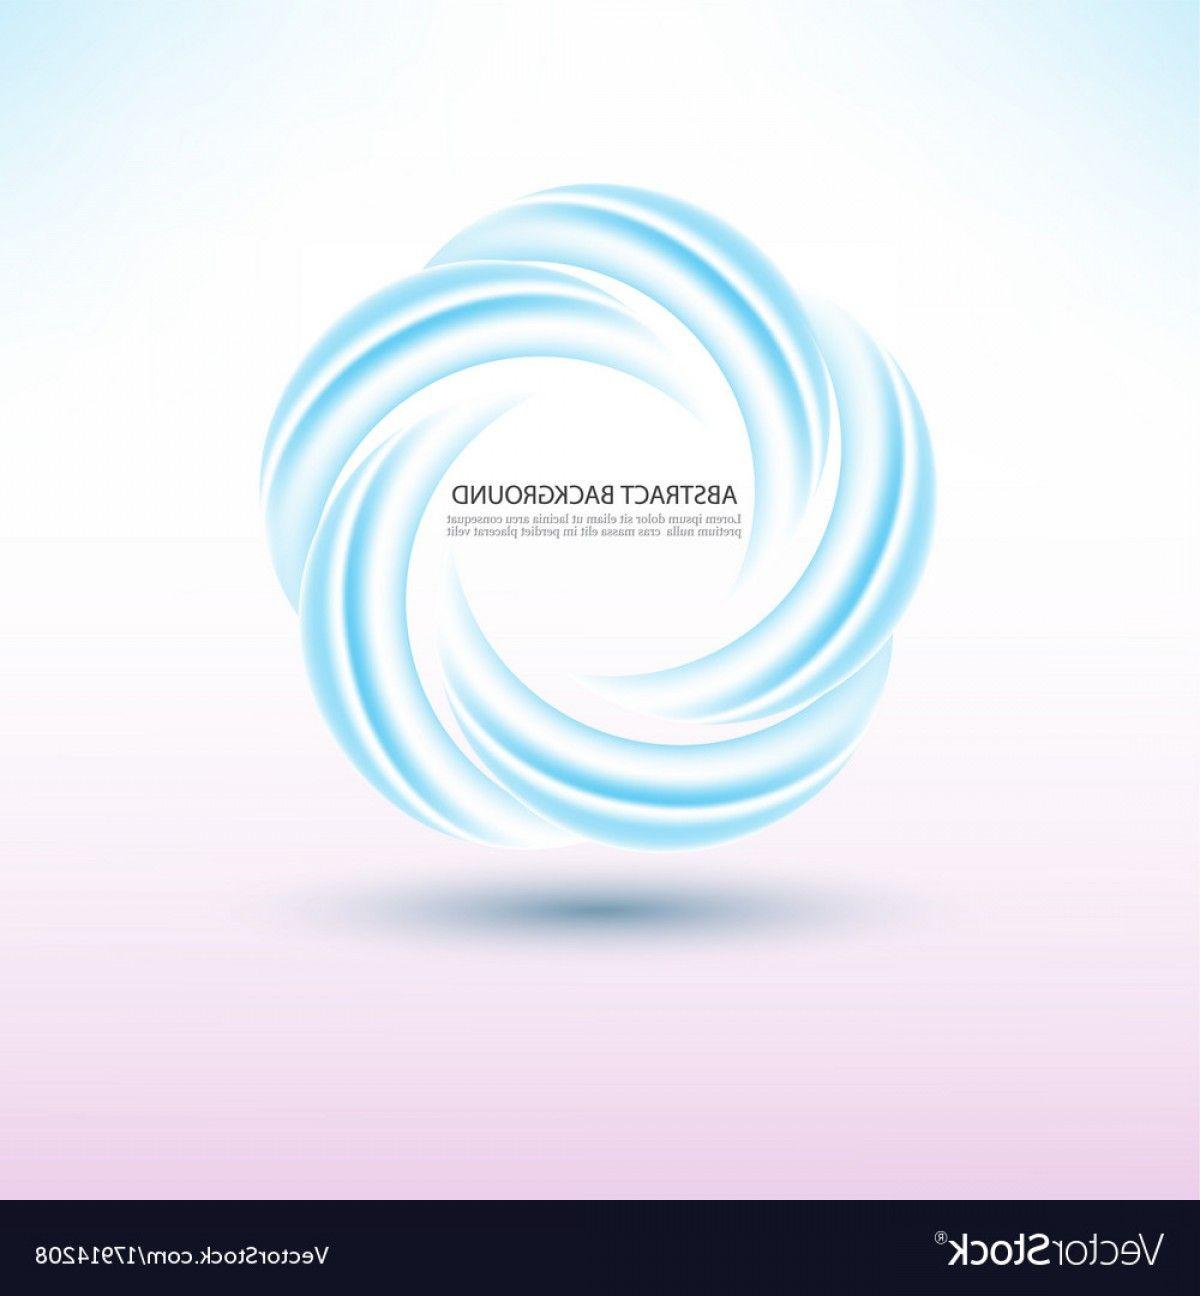 Blue Swirl Circle Logo - Abstract Blue Swirl Circle Round Frame Or Banner Vector